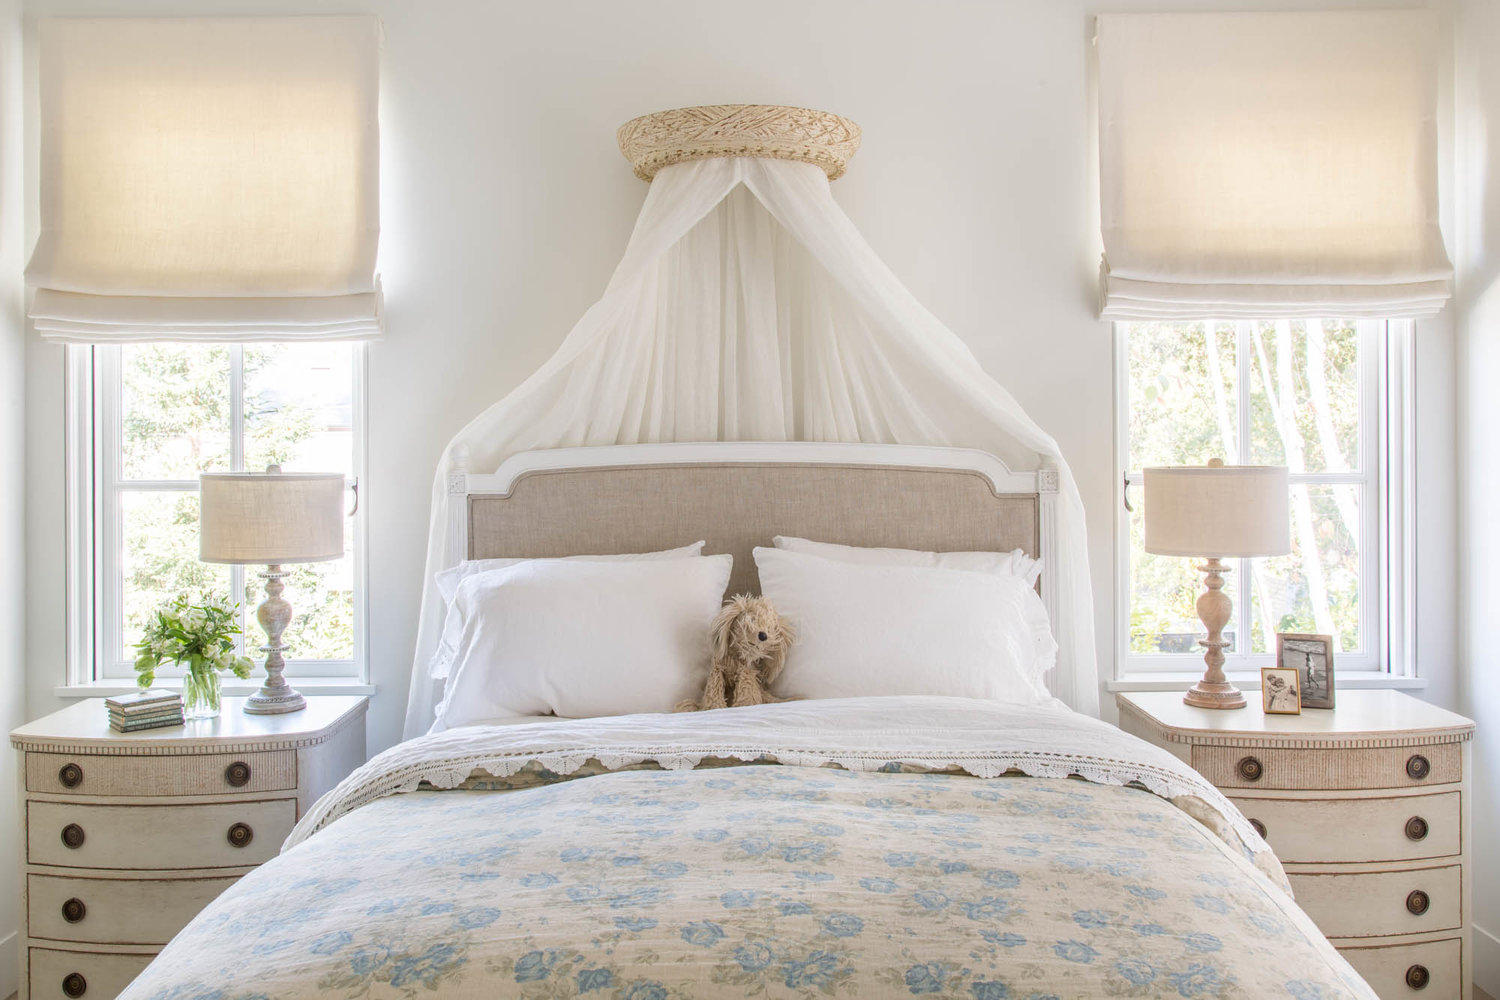 Liliy's Room at the Barnett residence in Atherton, CA.  Architecture and interior design by Brooke and Steve Giannetti.